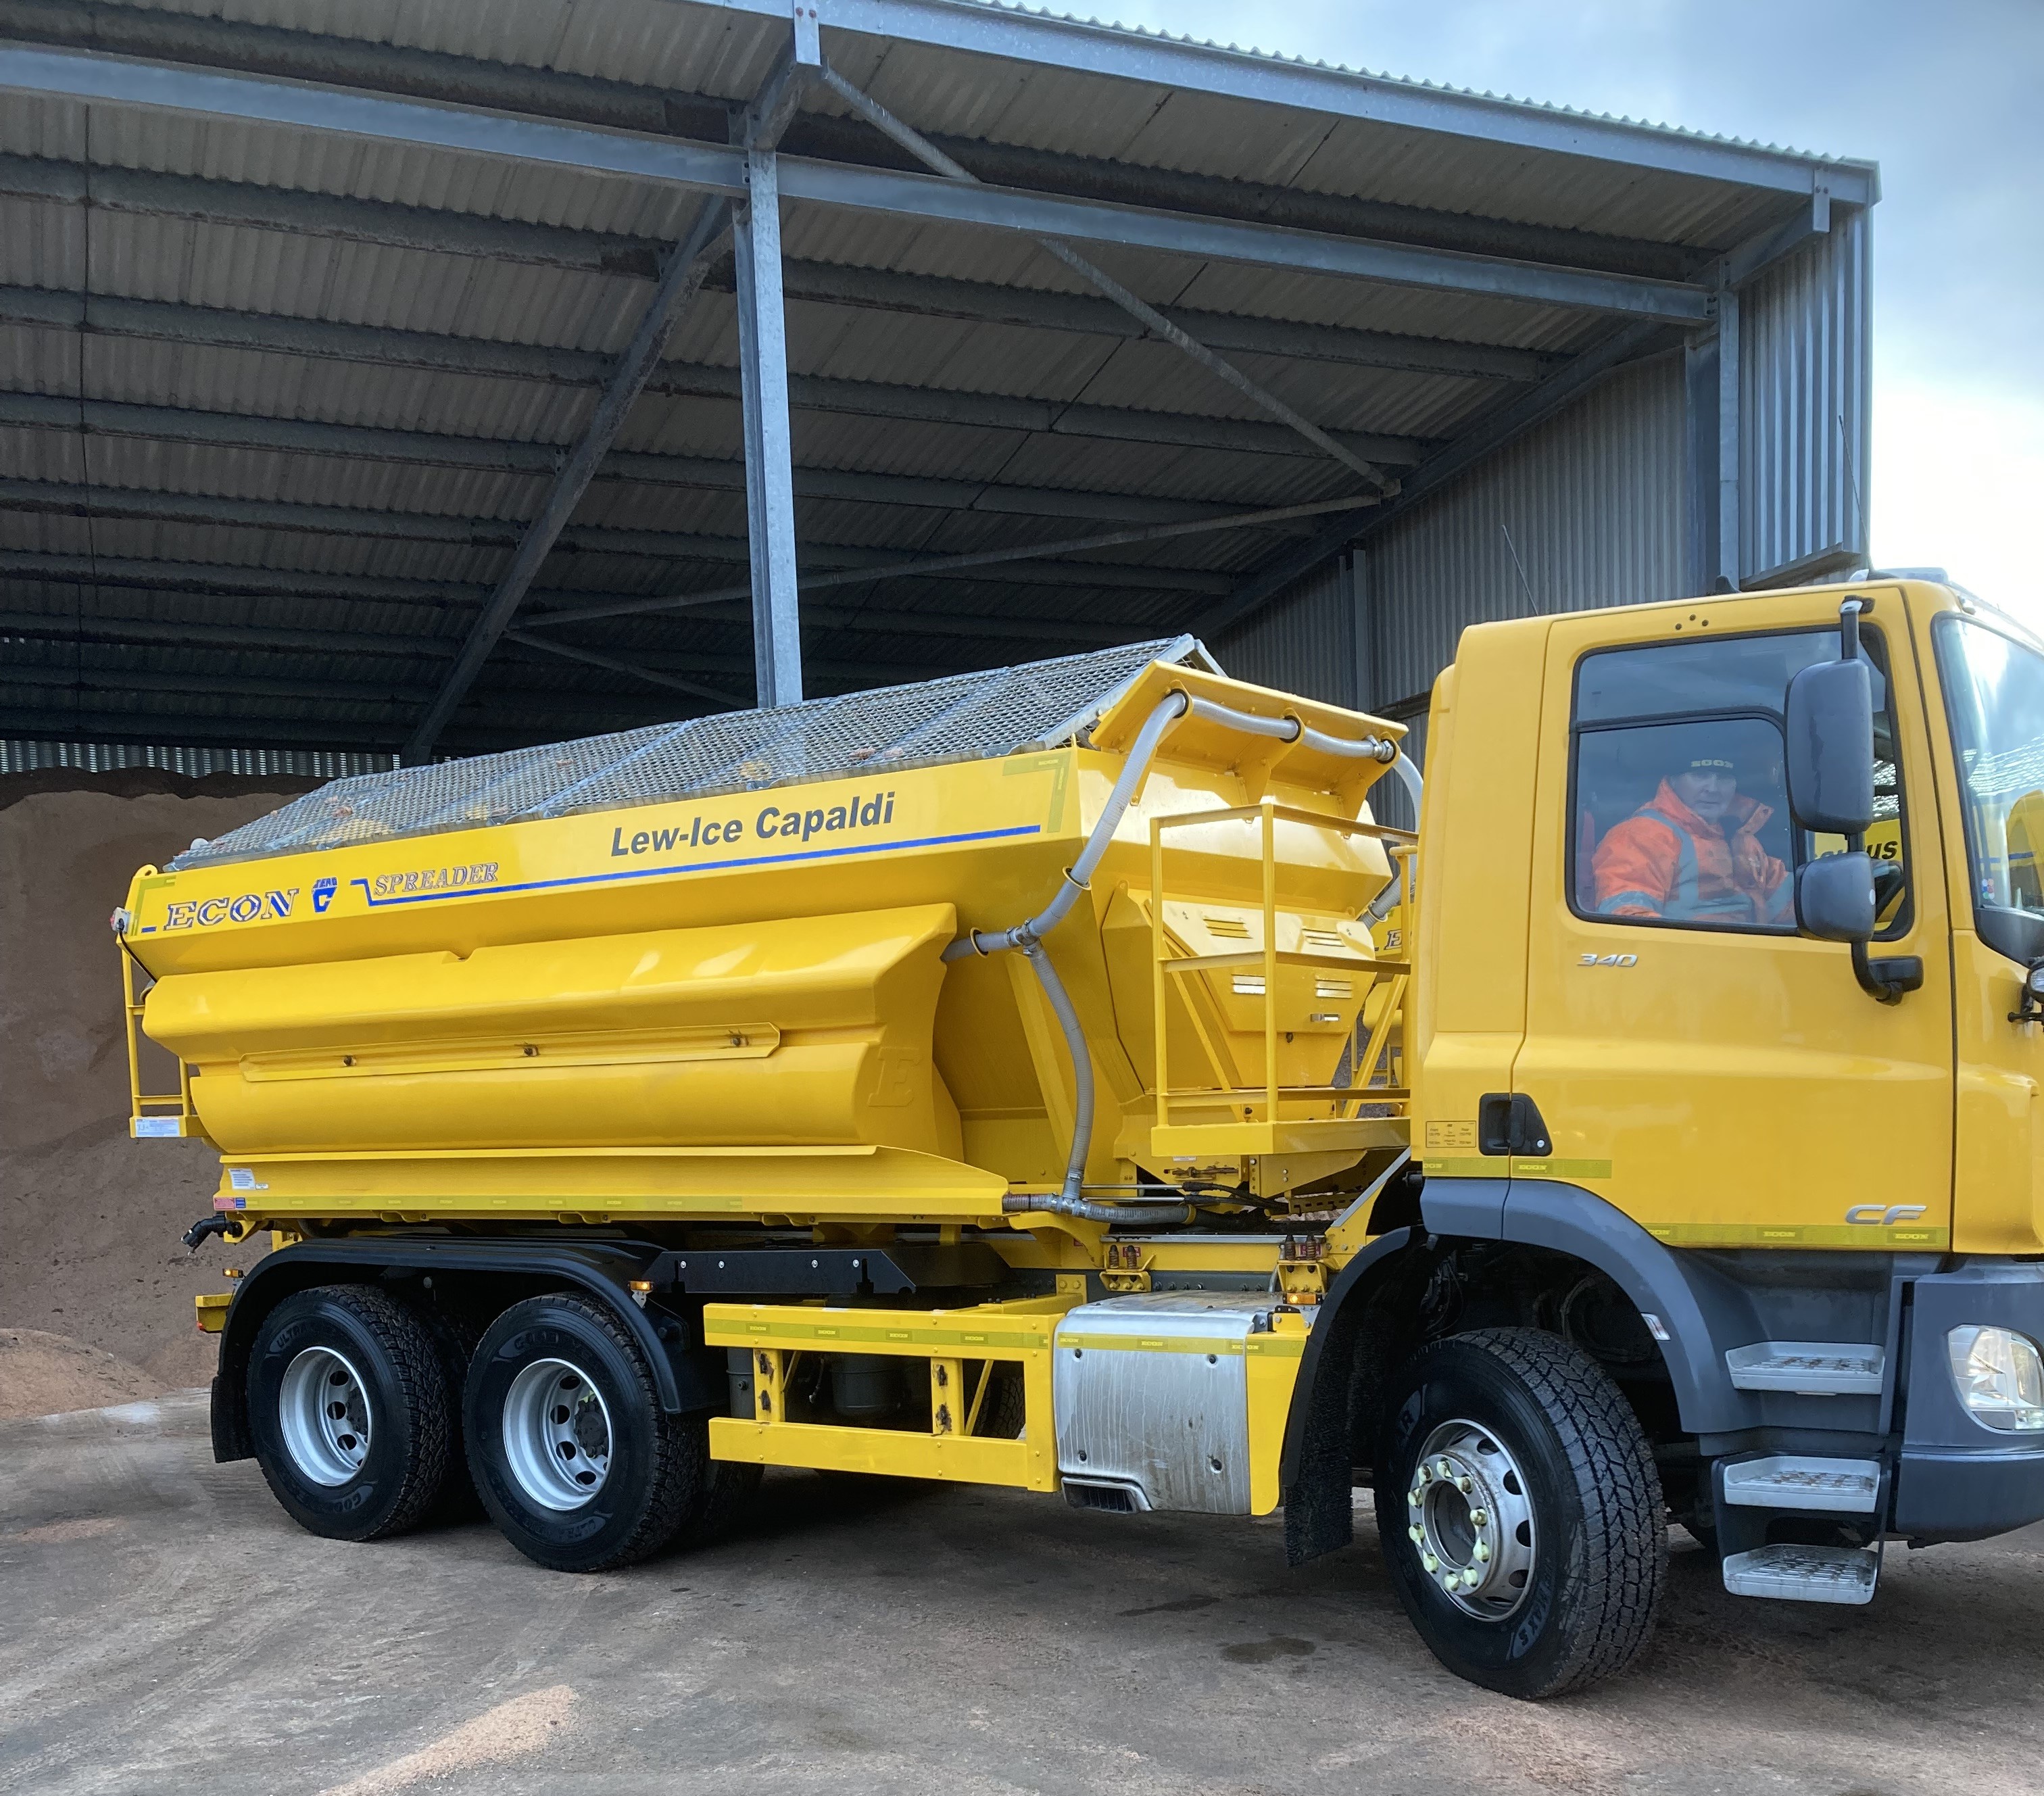 gritter image